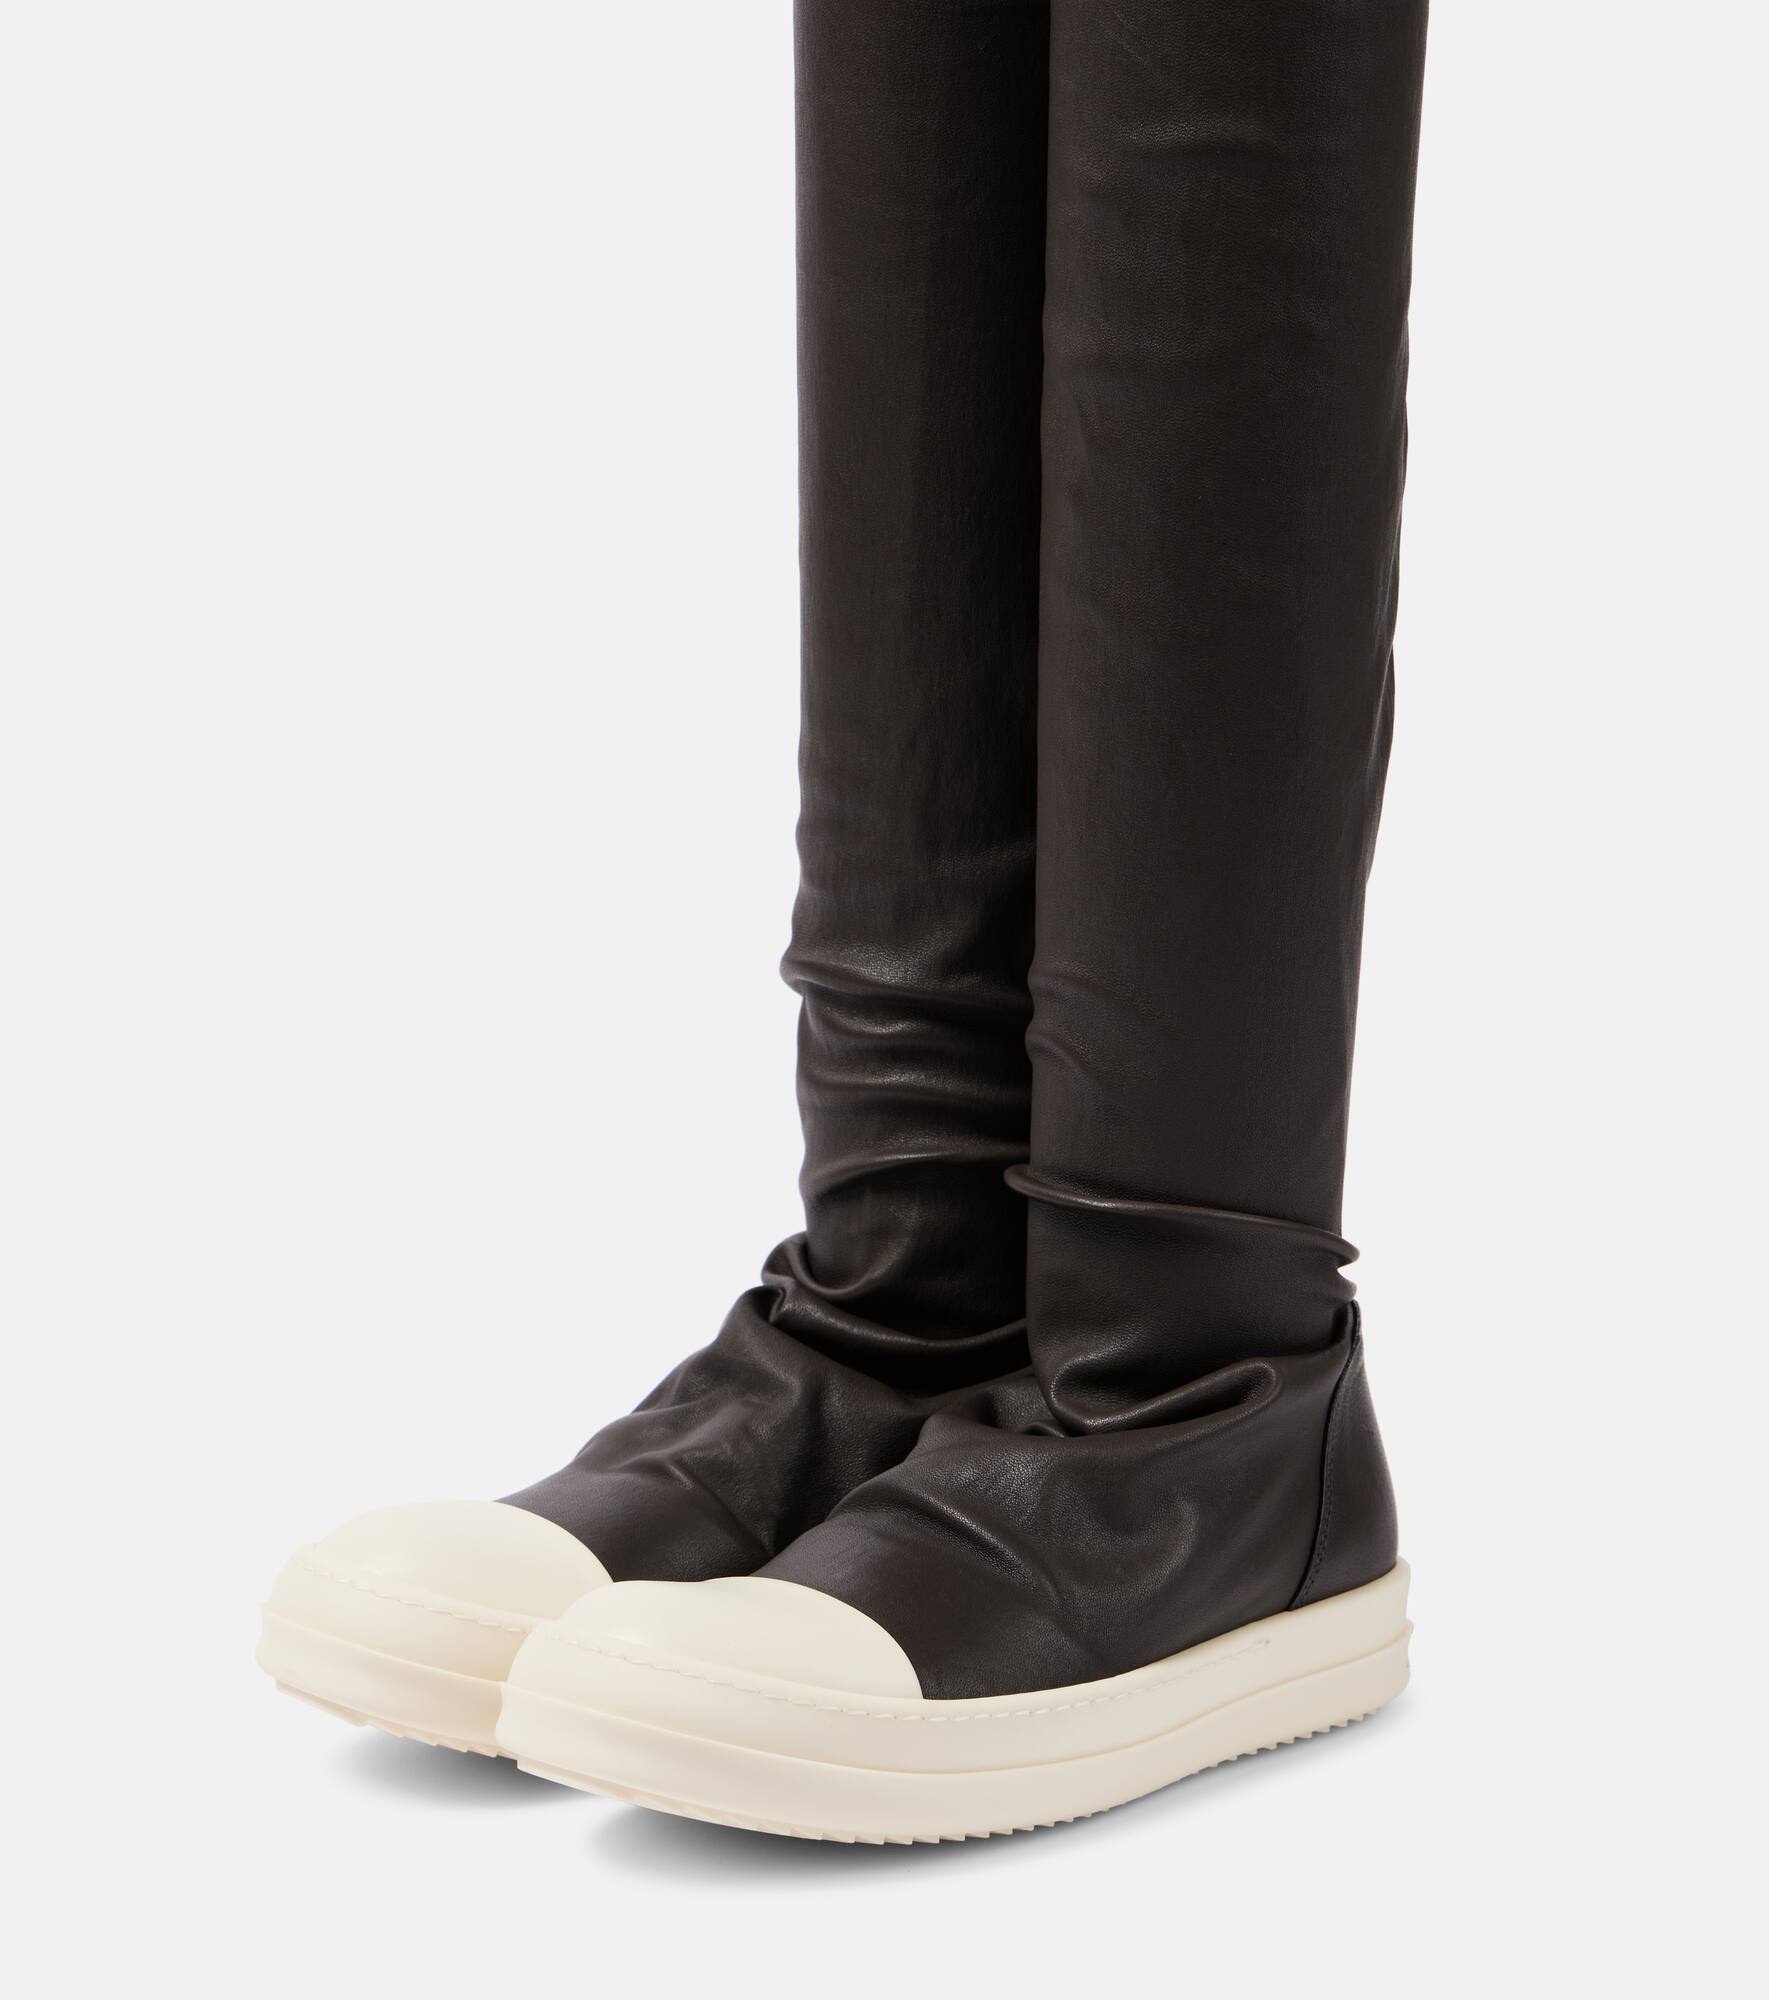 Stocking knee-high leather sneakers - 5